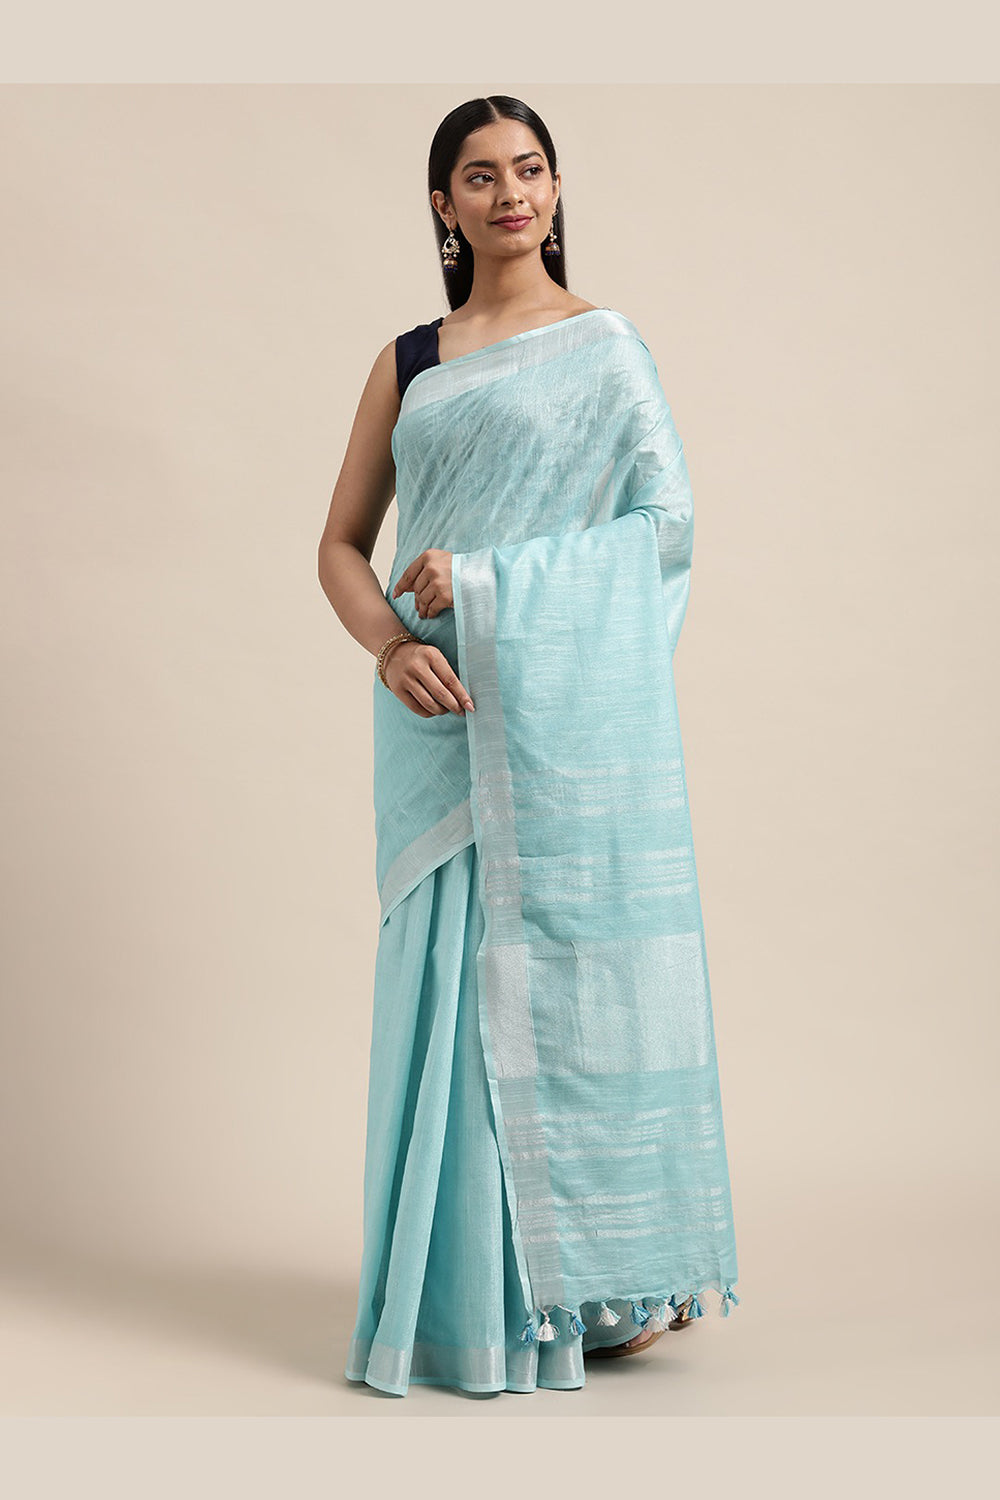 Buy Blue Woven Linen One Minute Saree